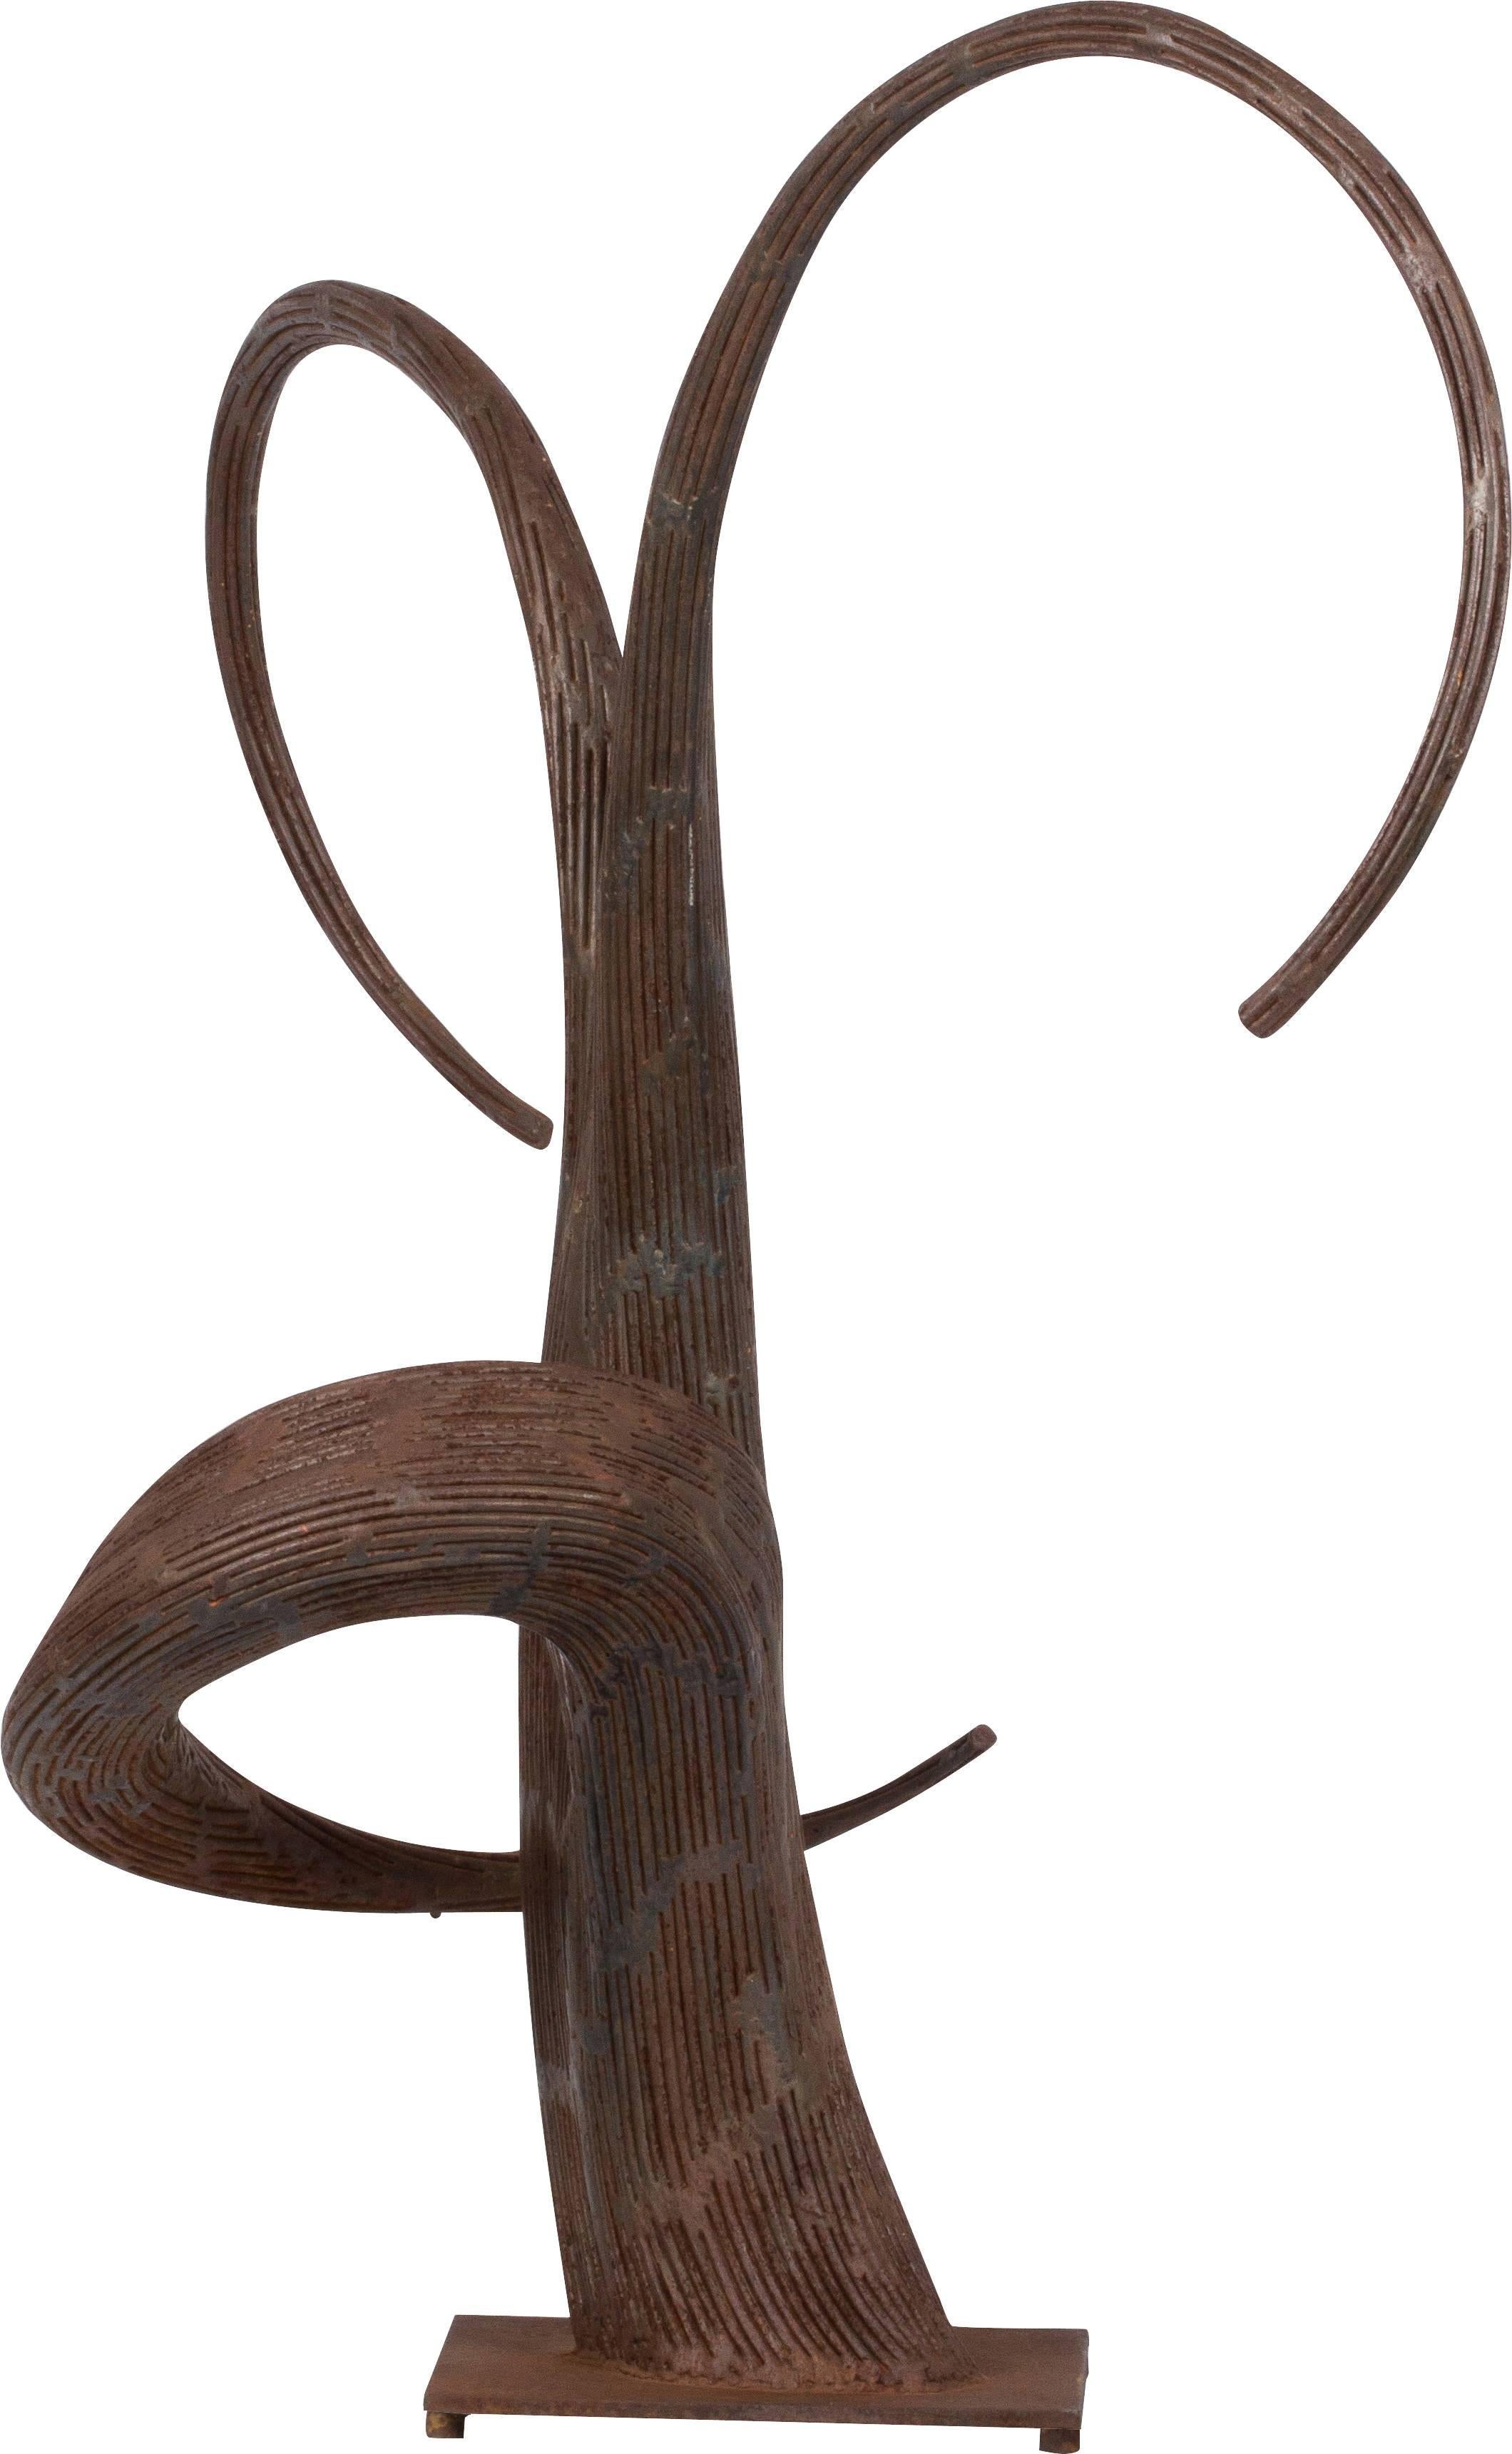 Unusual and dramatic biomorphic cast metal sculpture, circa late 1980s. Sculpture has an organic, tree root like appearance with two curved, root like tendrils protruding upward and the third tendril wrapping around the base of the sculpture.